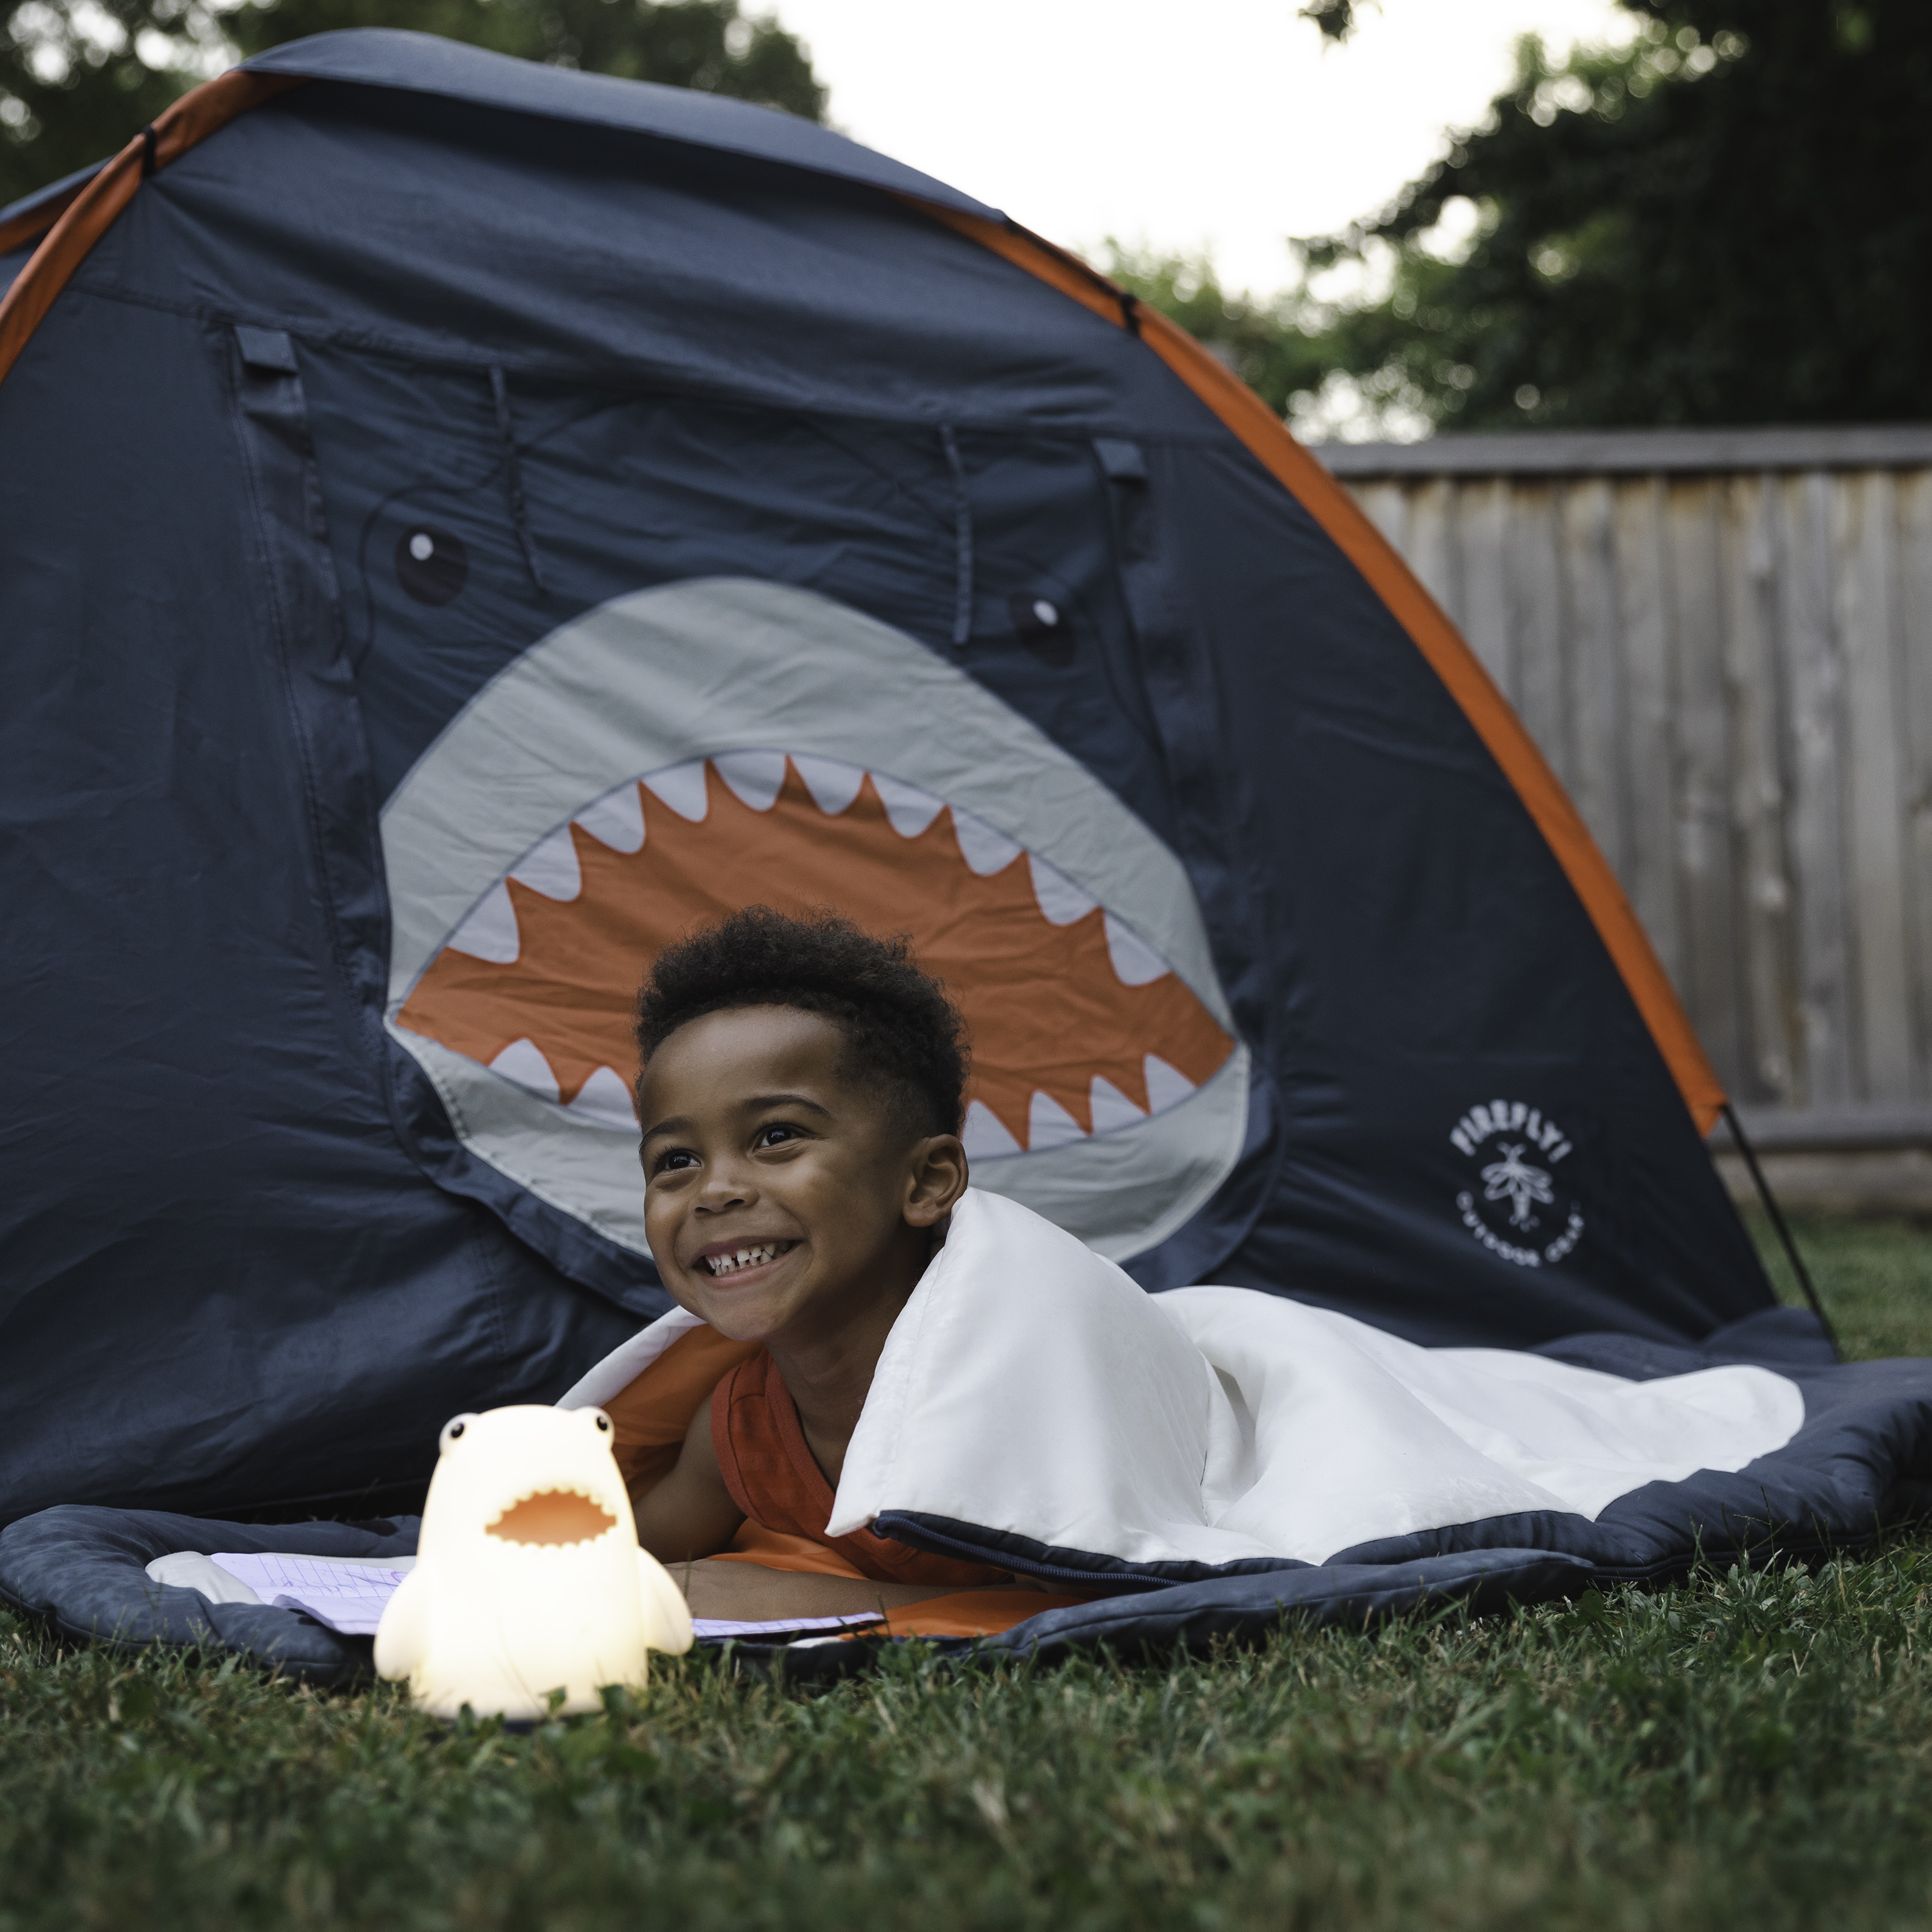 Firefly! Outdoor Gear Finn the Shark Kid's Camping Combo (One-Room Tent, Sleeping Bag, Lanter - image 3 of 30